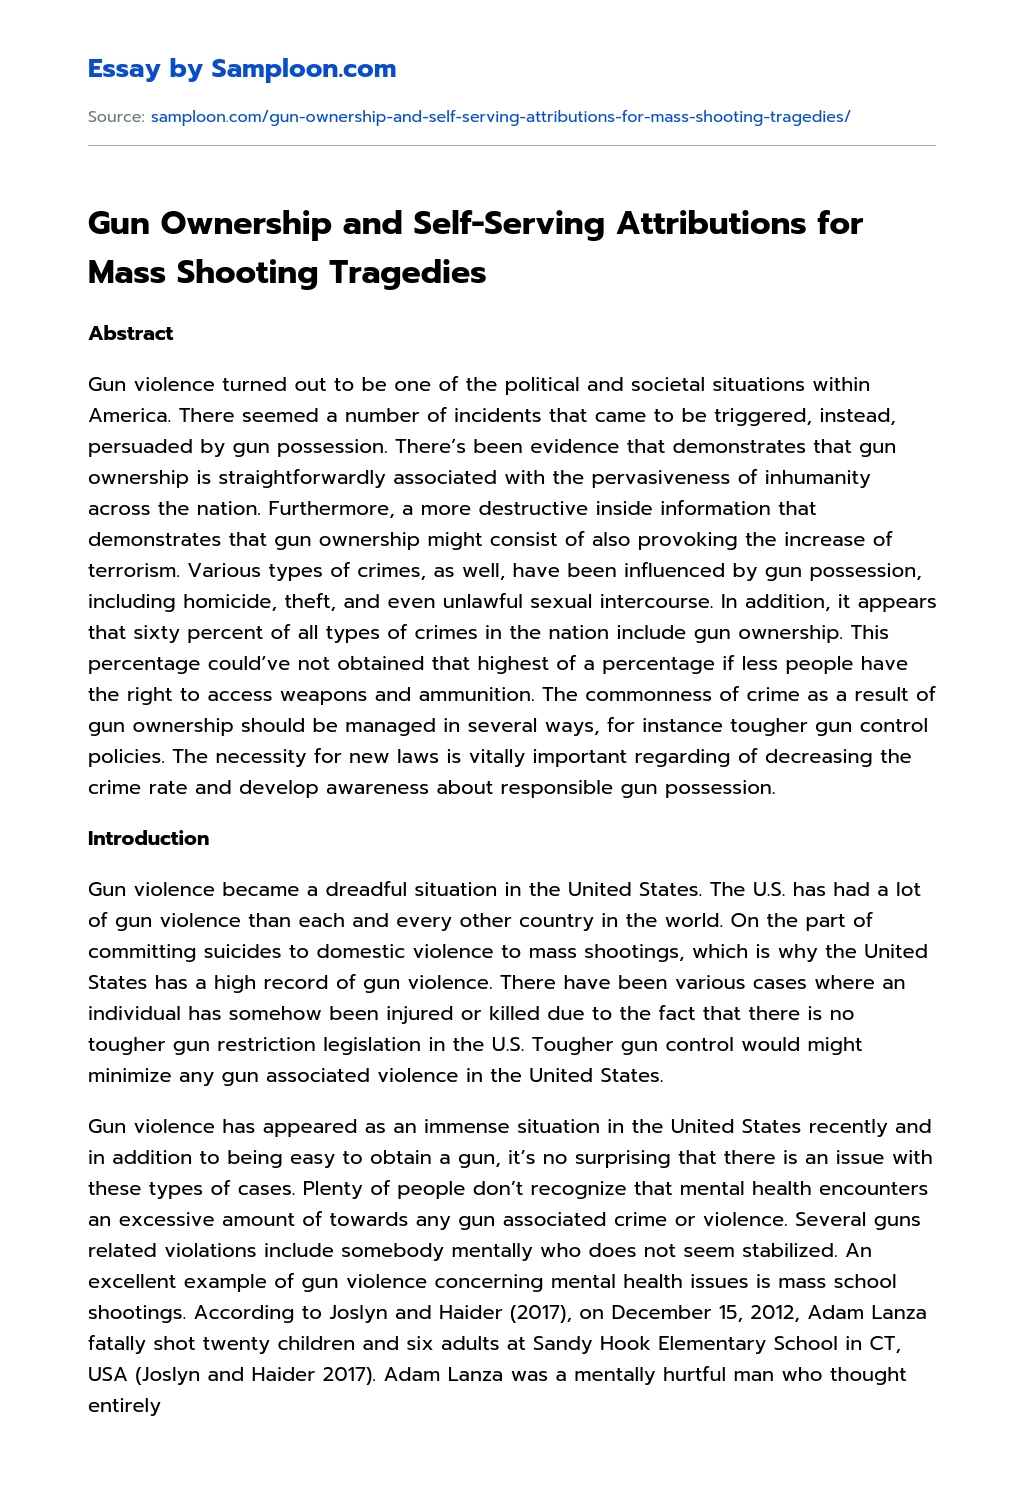 Gun Ownership and Self-Serving Attributions for Mass Shooting Tragedies essay